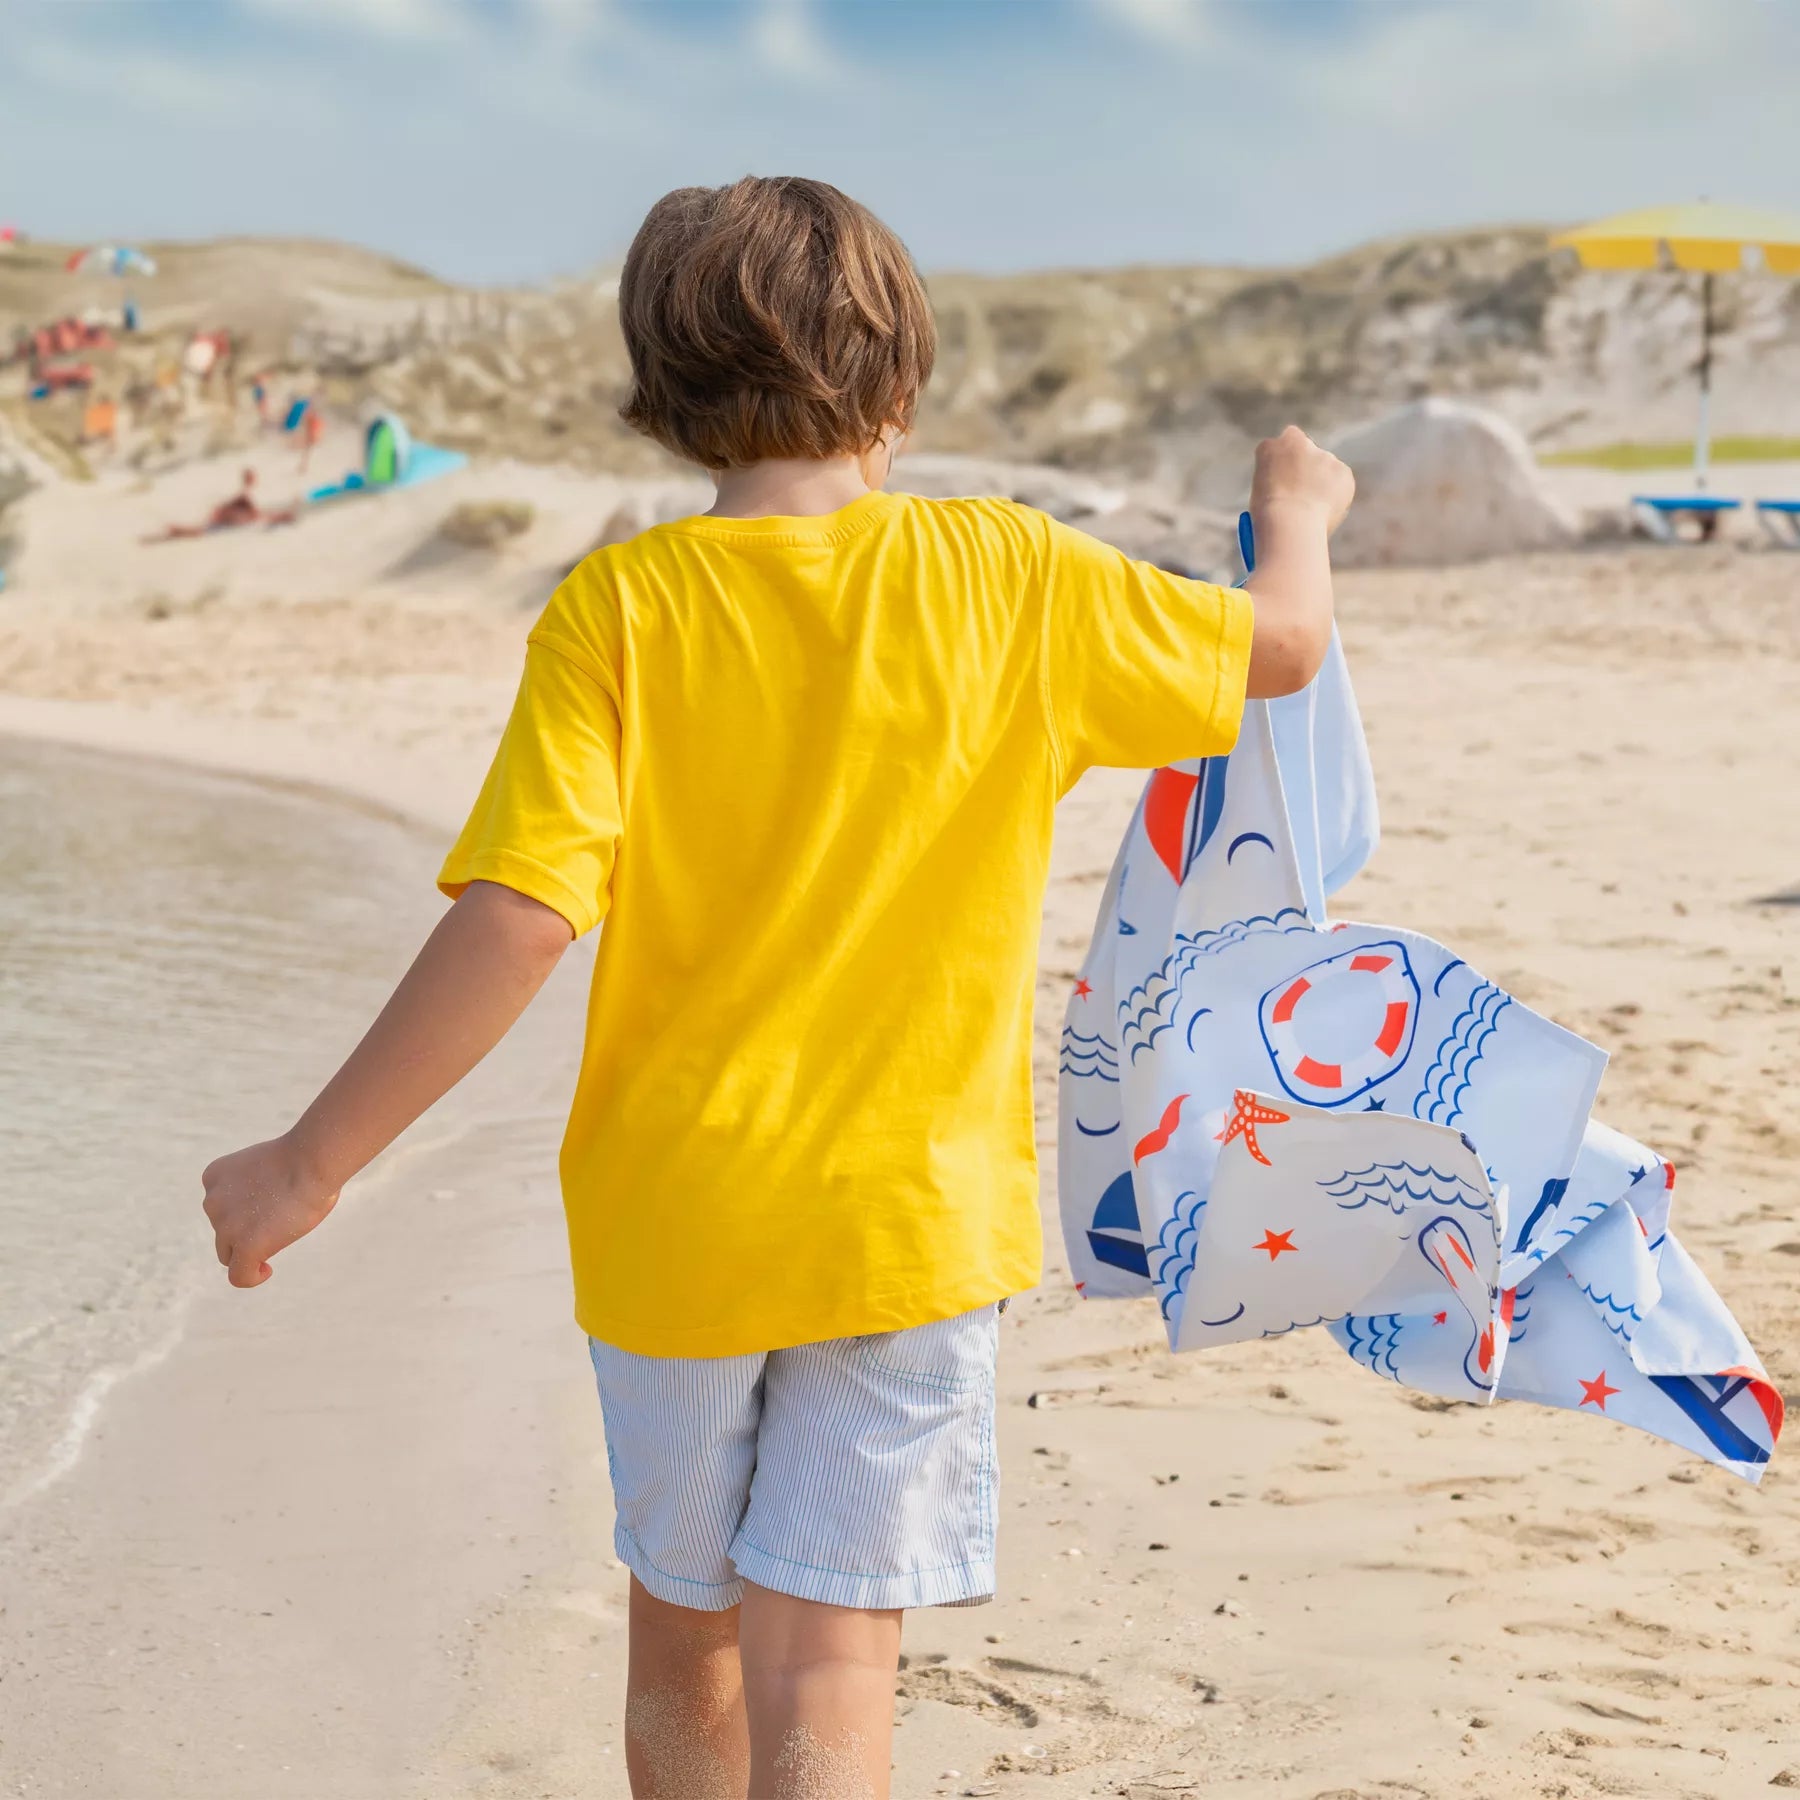 A boy holding a Quick Dry, Sand Free, Light Weight, Compact and Ecofriendly Microfiber Beach Towel from La Toalla designed for kids